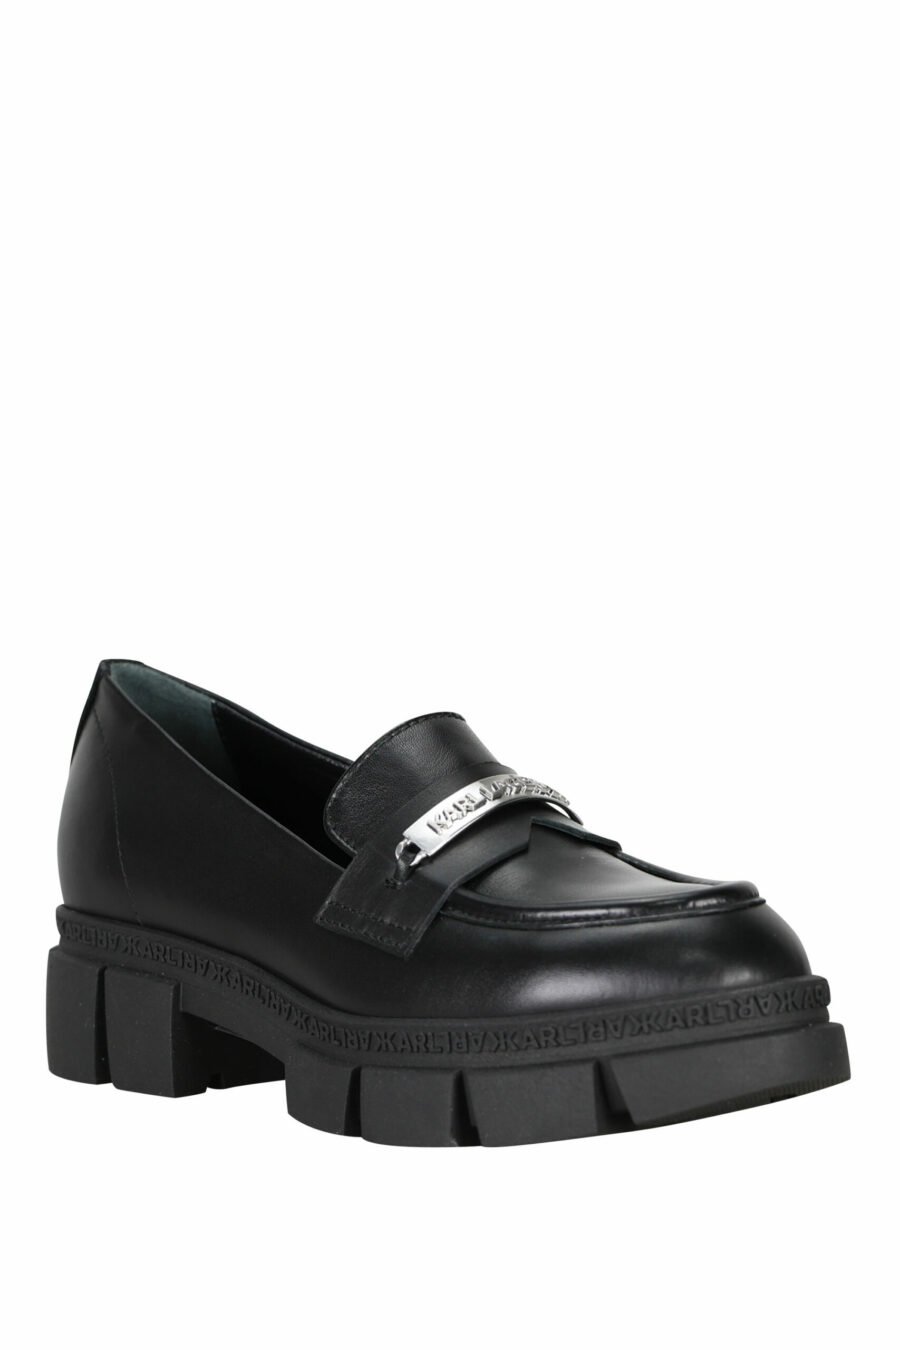 Black loafers with mini-logo and platform - 5059529284977 1 scaled